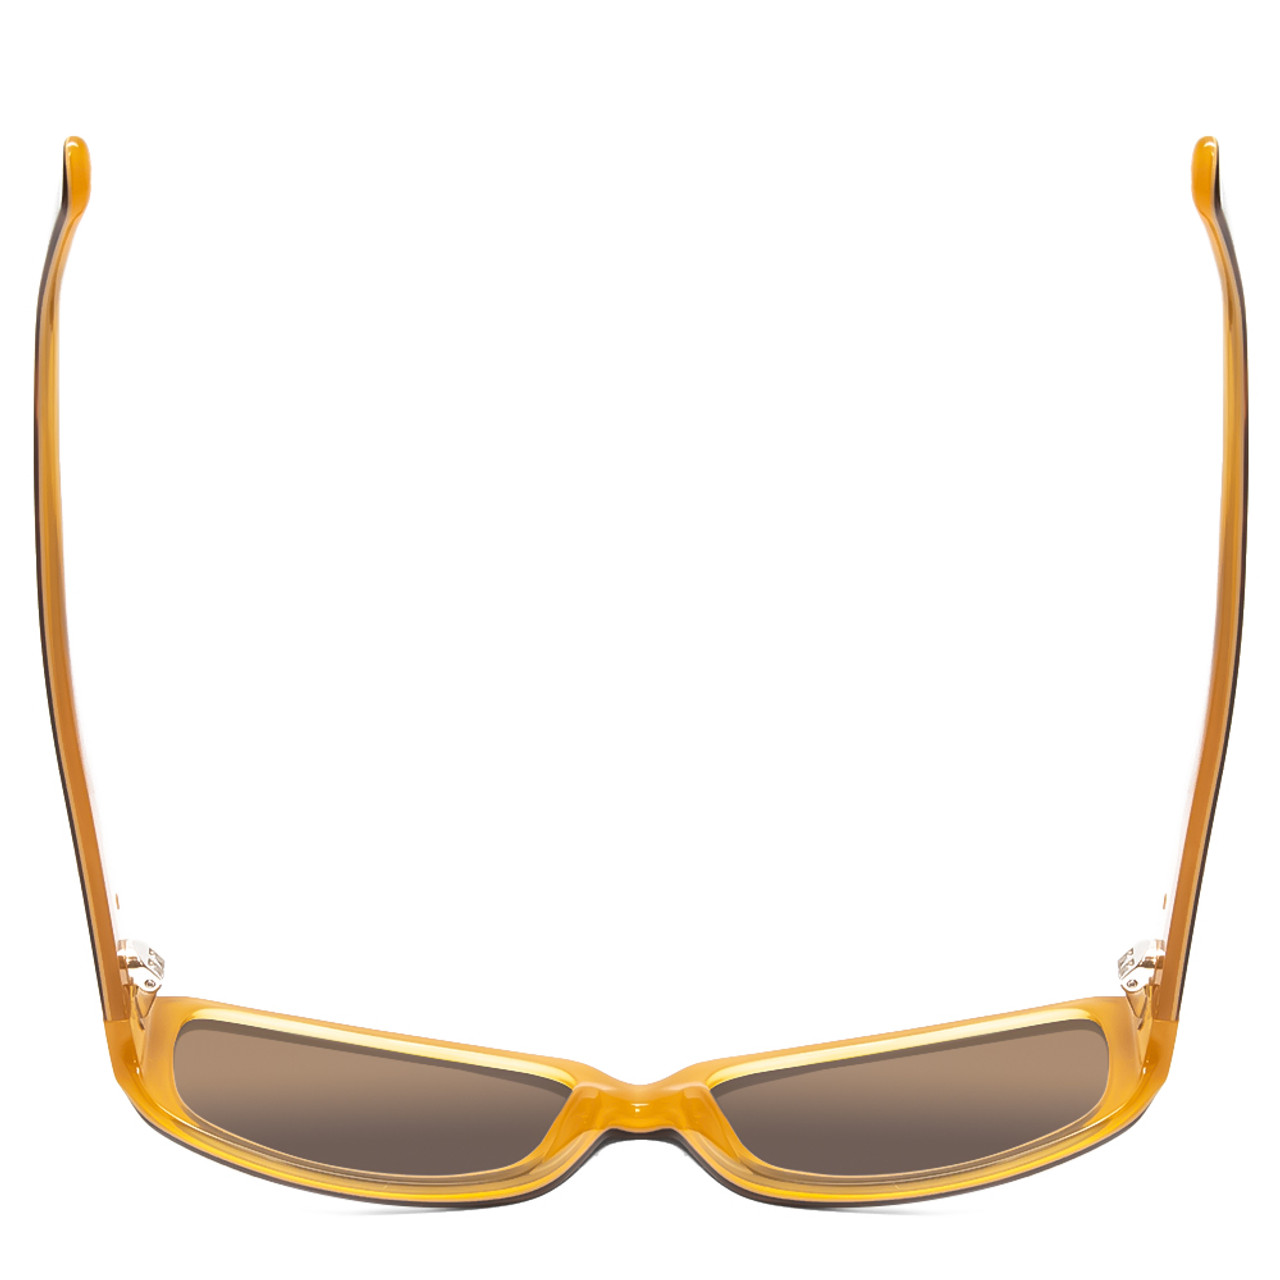 Top View of Kate Spade Paxton Lady Polarized Sunglasses Tortoise Saffron Caramel/Brown 53 mm